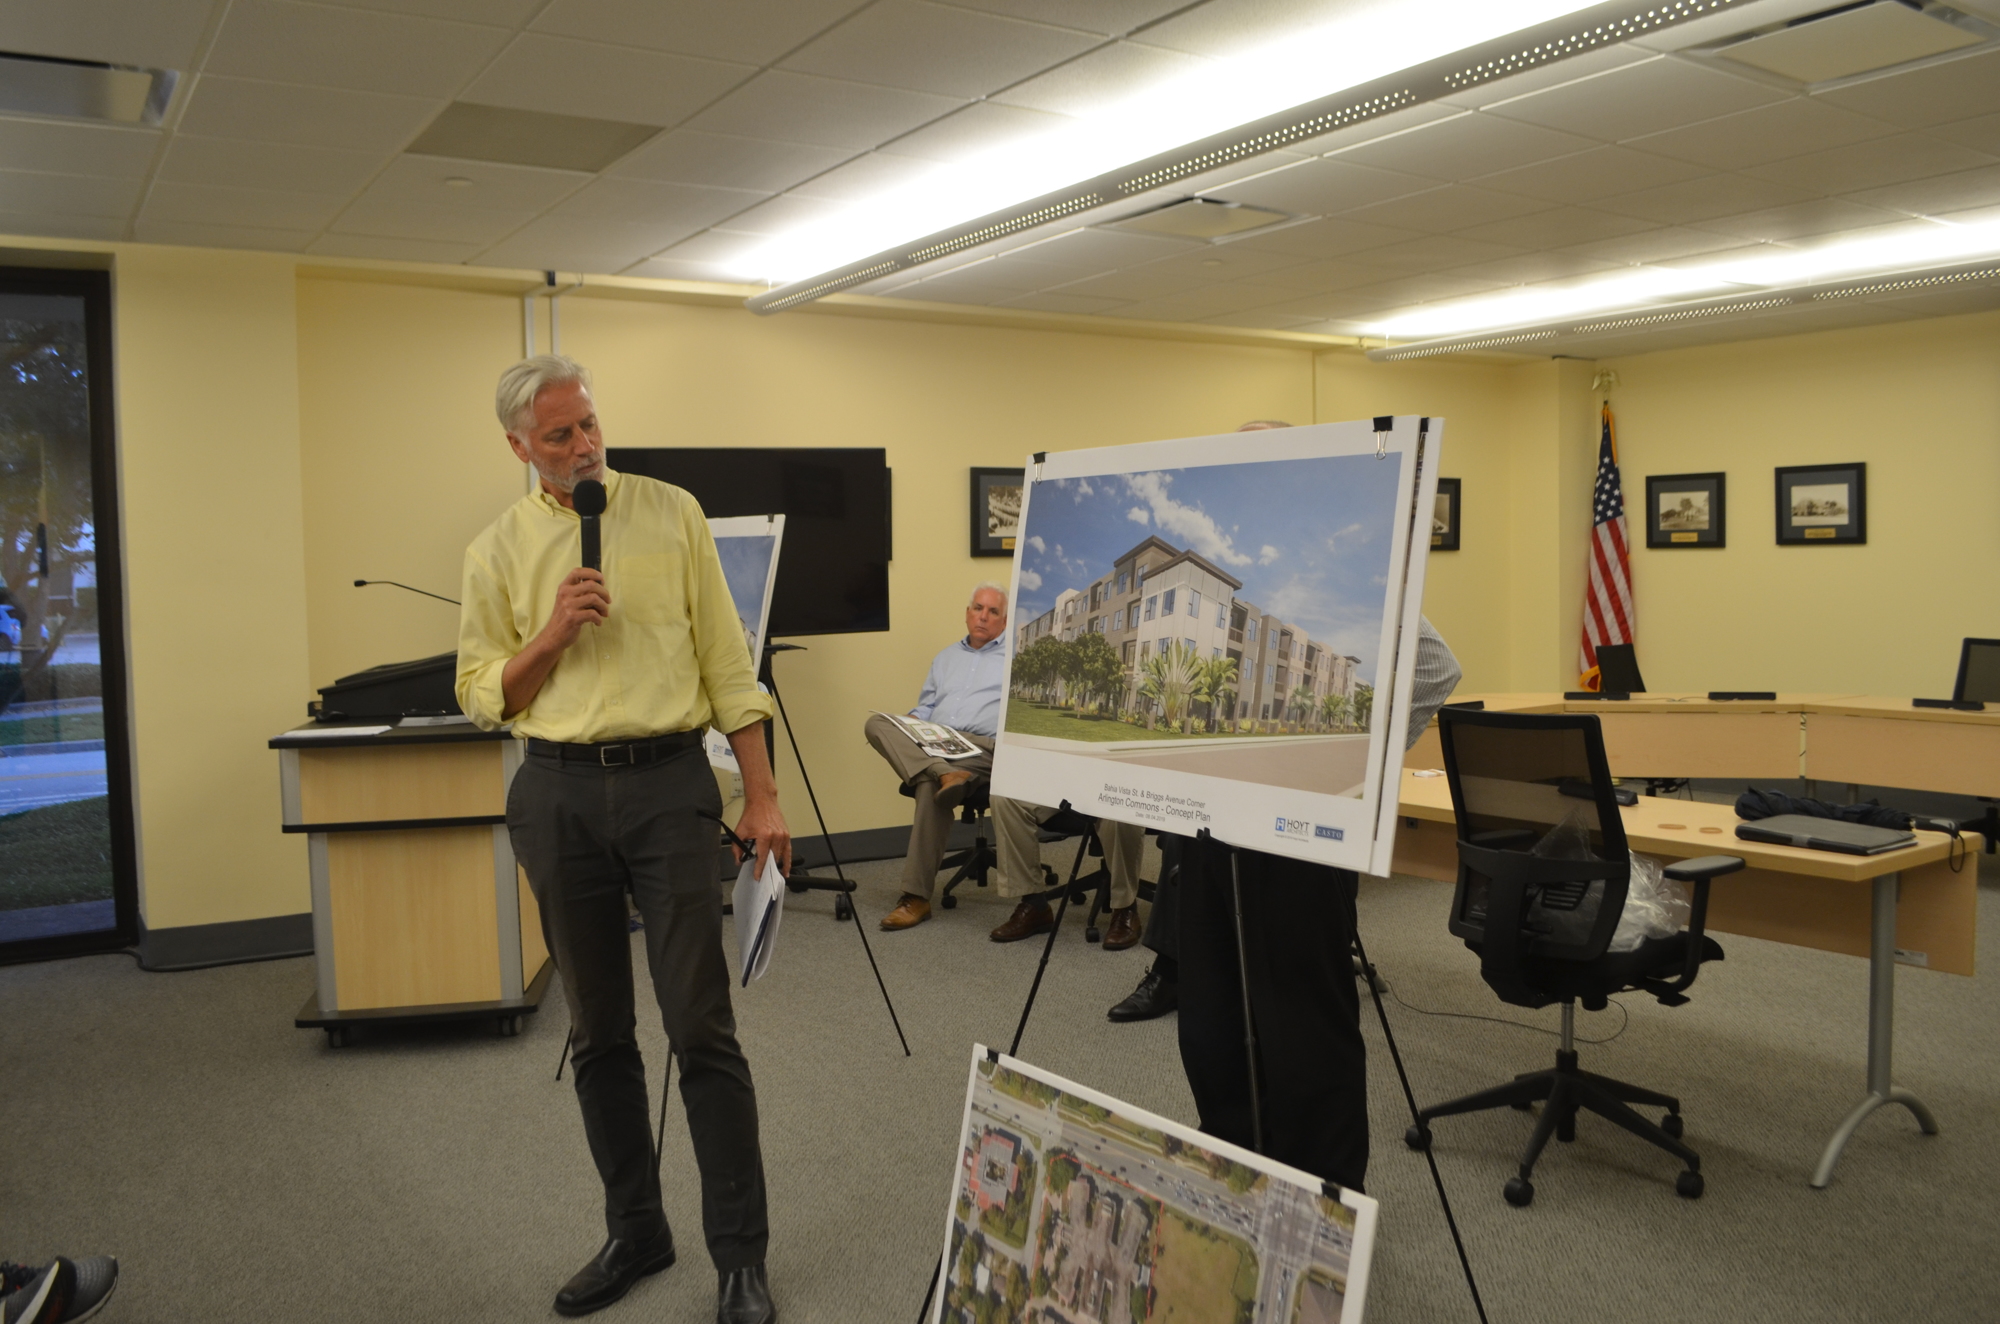 Chris Gallagher, a designer with Hoyt Architects, presented conceptual renderings for the Arlington Commons project at Monday's community workshop.